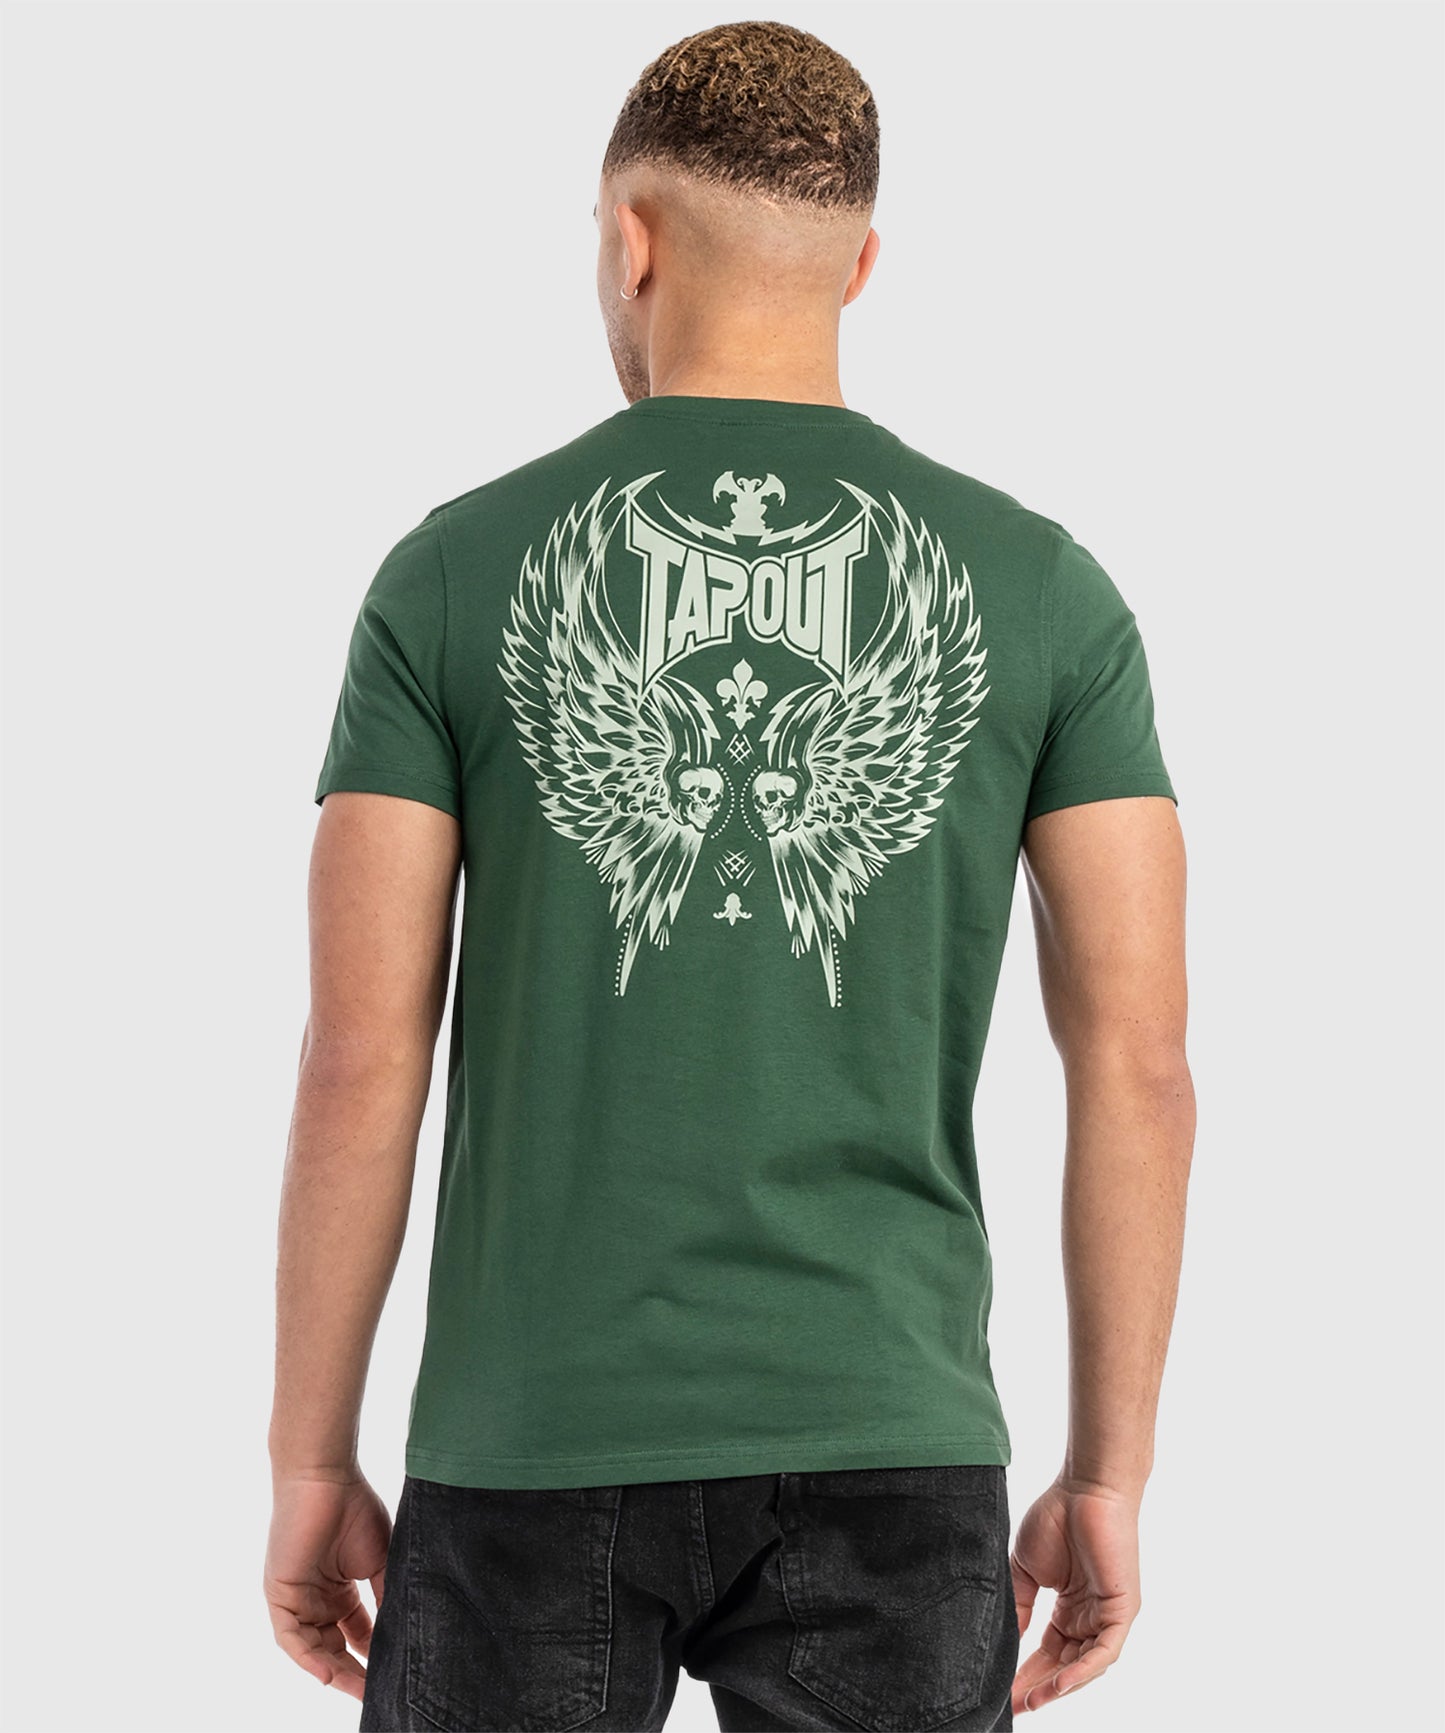 T-Shirt Tapout Mask - Vert